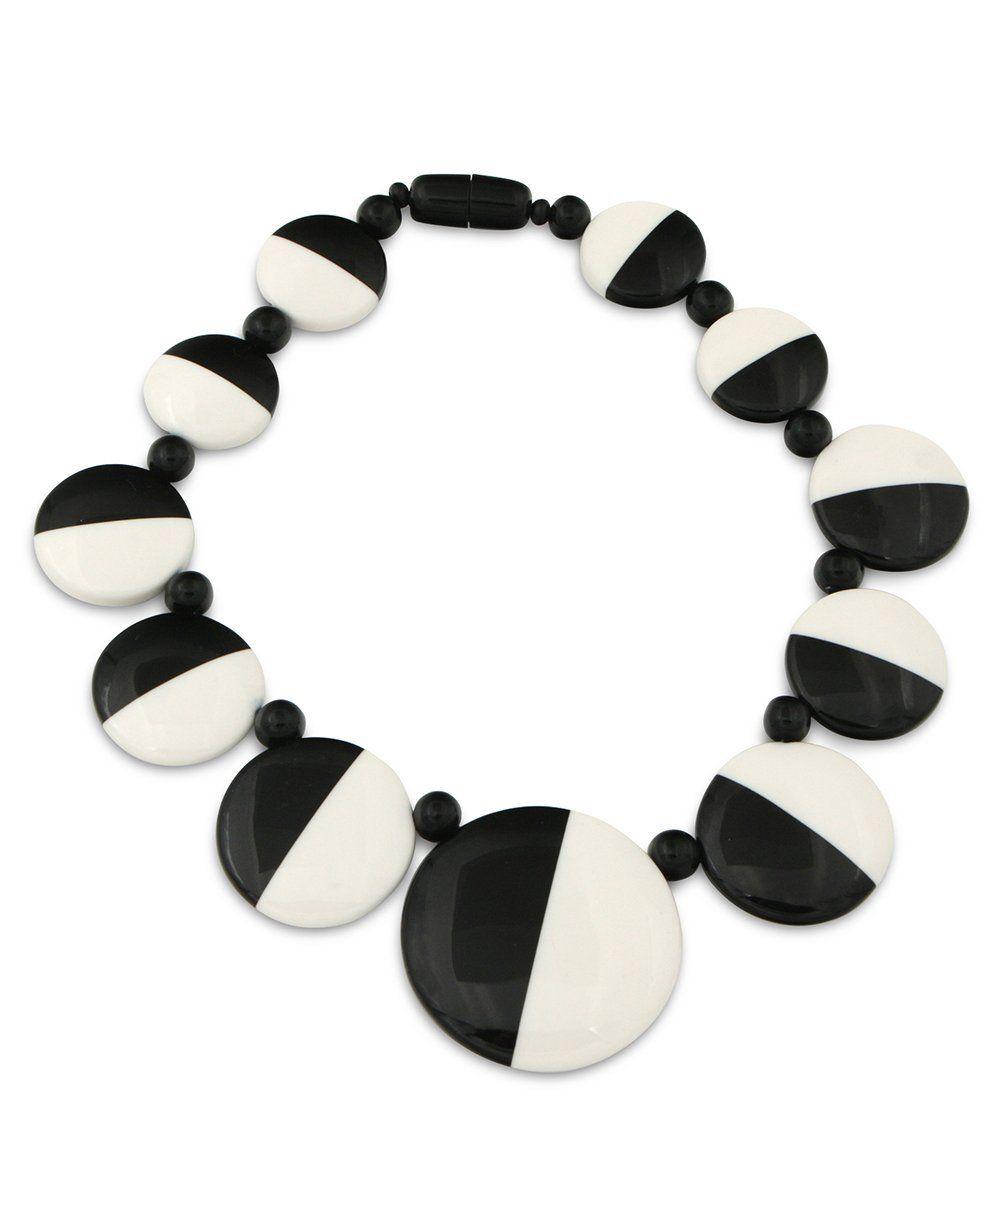 Semicircle with White Mountain Black Logo - Semi Circle Black And White Disk Necklace, Nepal